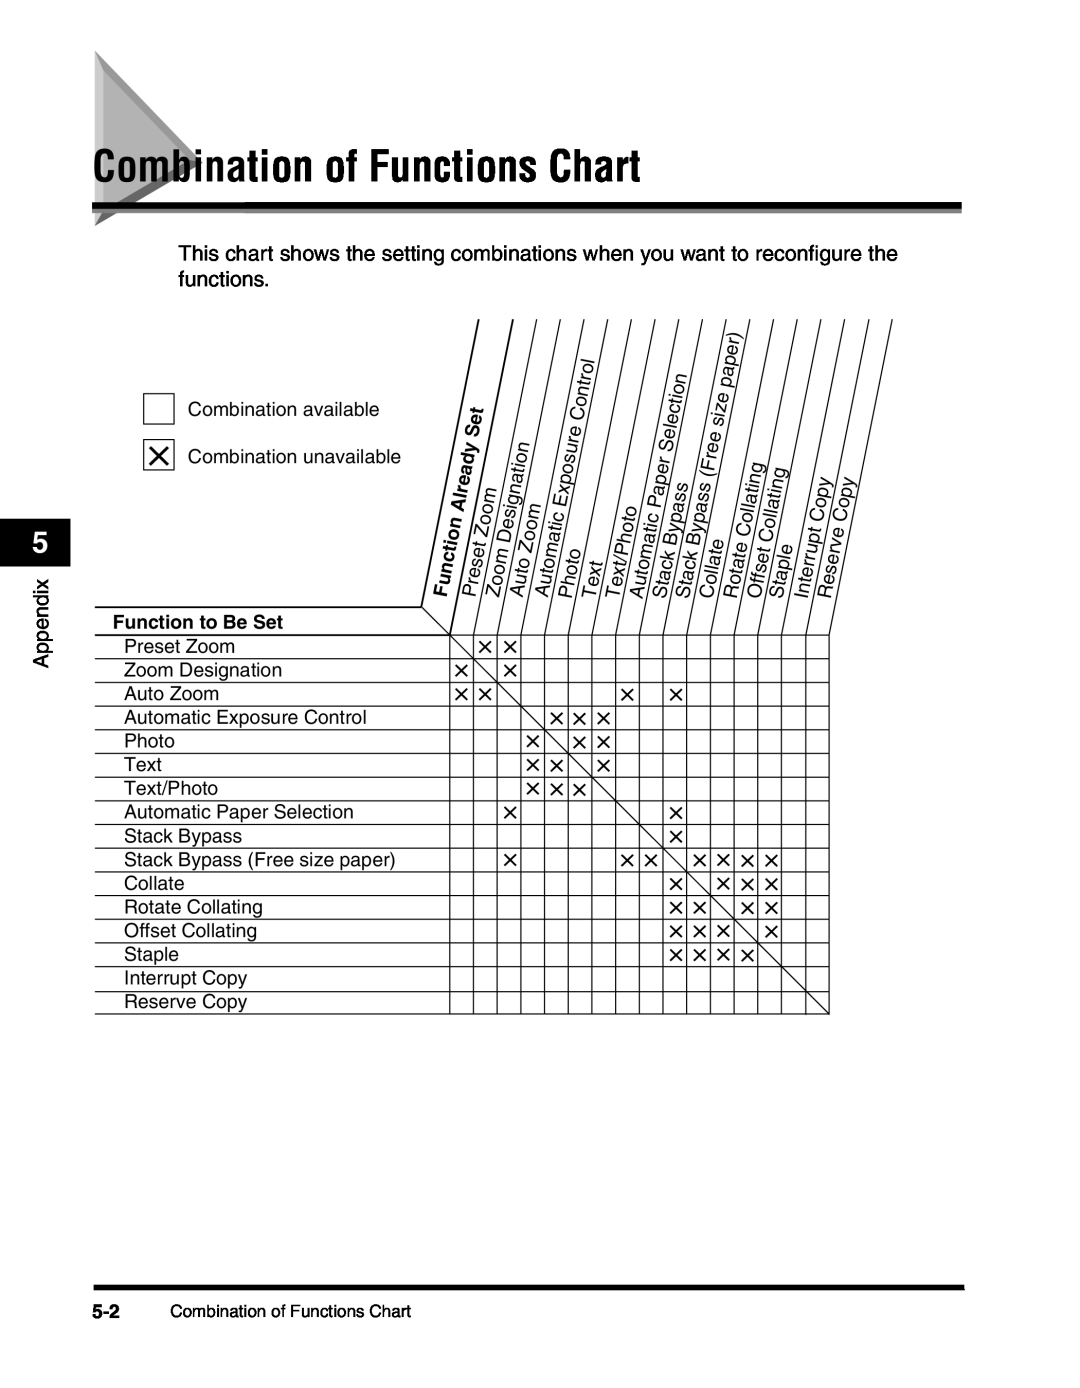 Canon 2010F manual Combination of Functions Chart, Appendix, Function to Be Set 